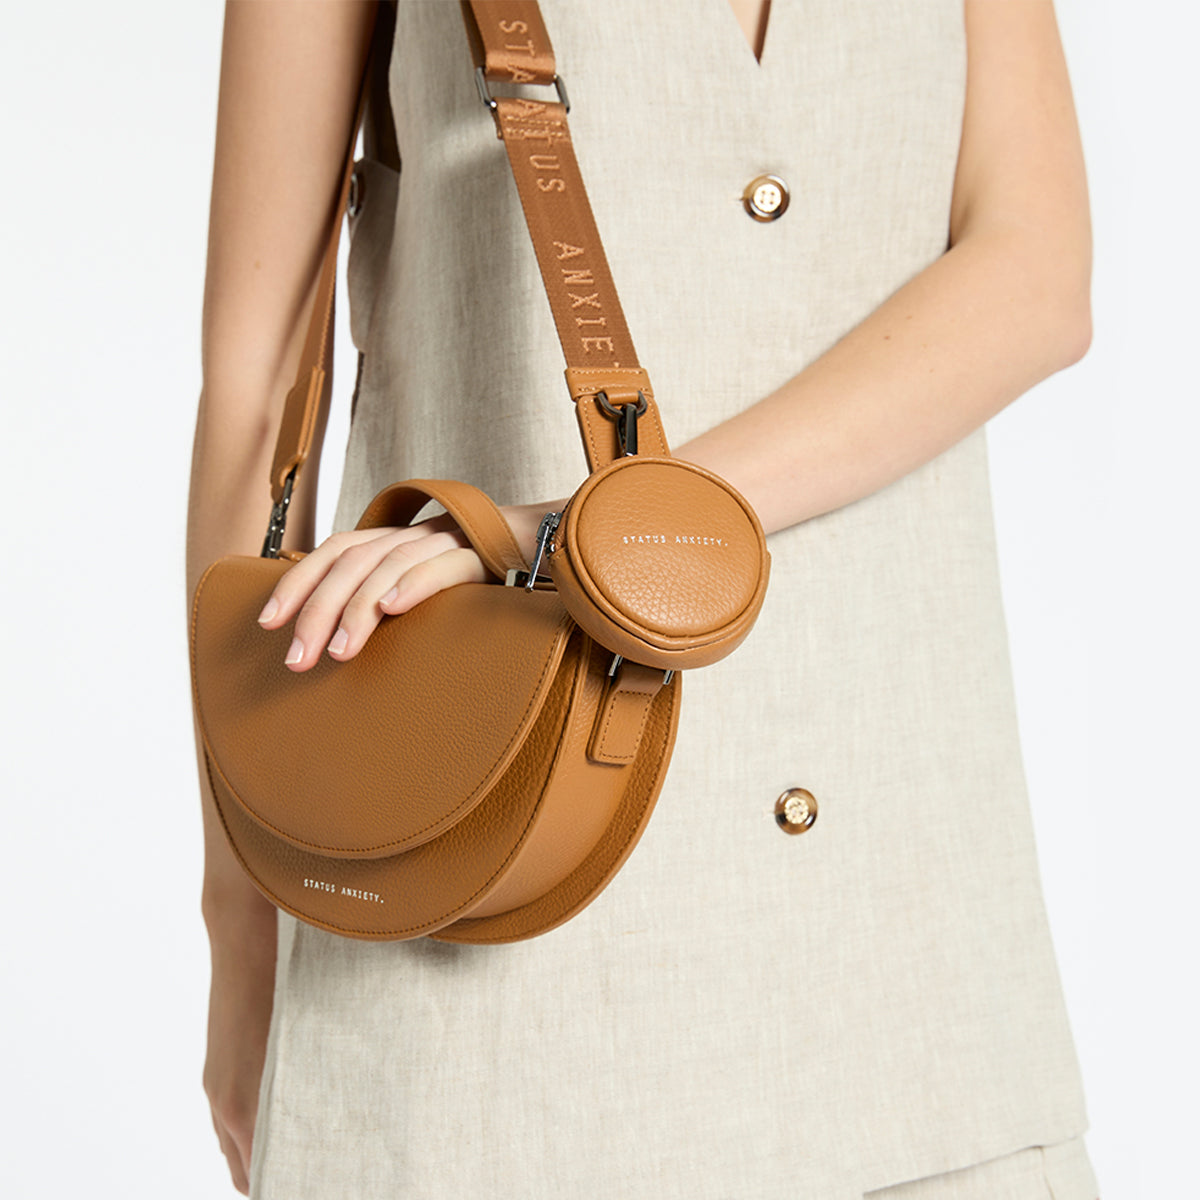 Status Anxiety - All Nighter Bag w. Webbed Strap - Tan